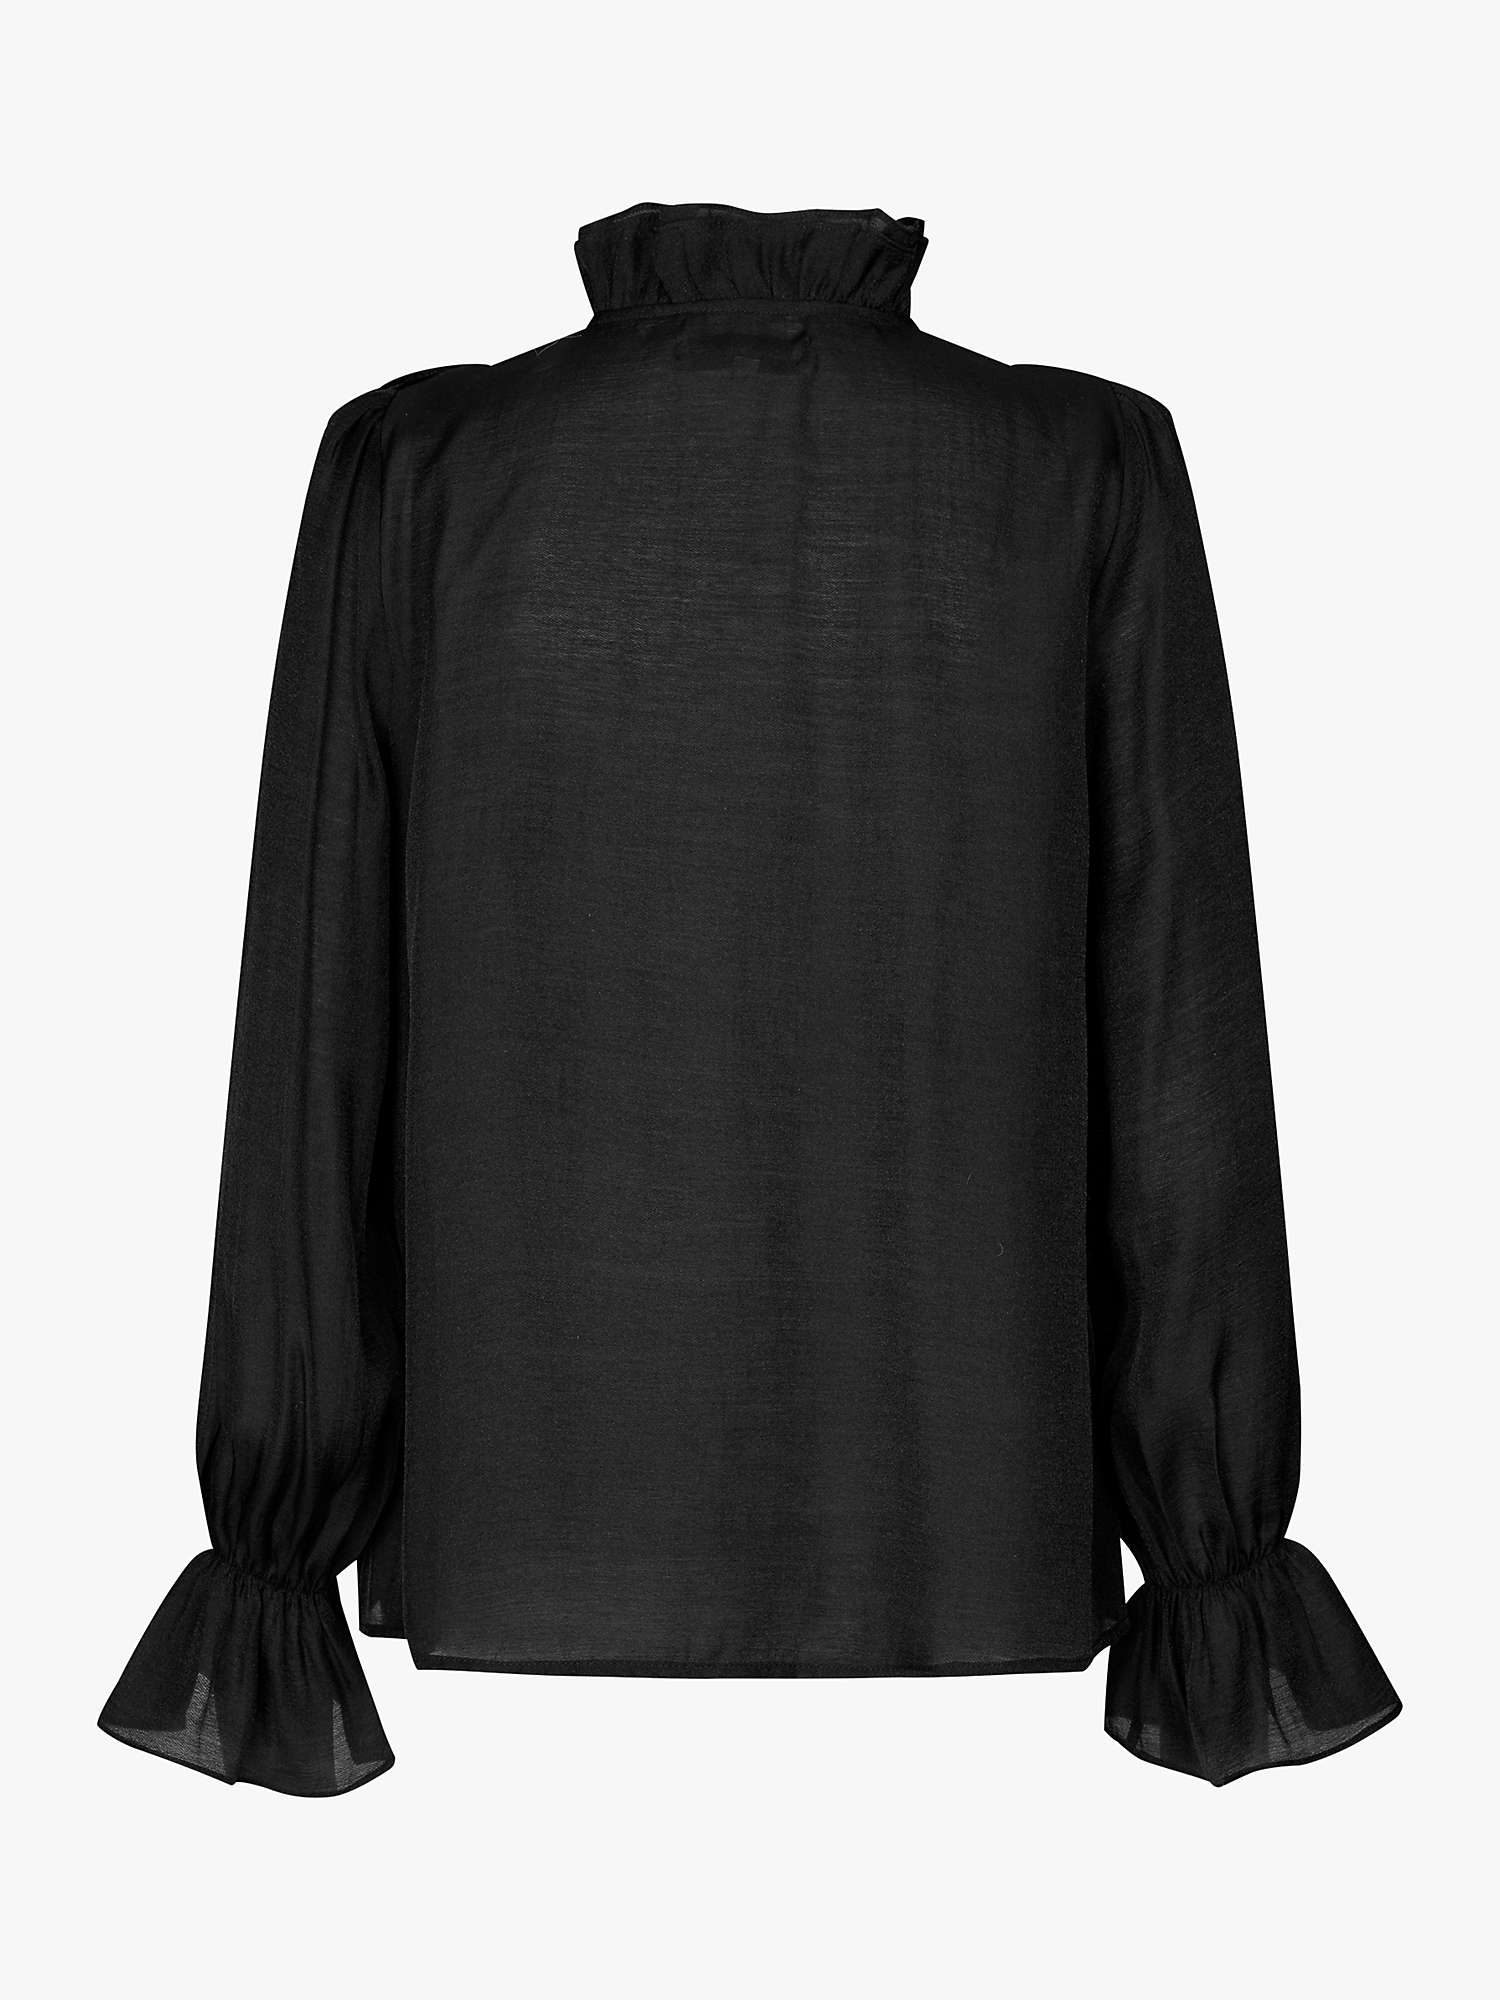 Buy Lollys Laundry Springs Ruffle Placket High Neck Blouse, Black Online at johnlewis.com